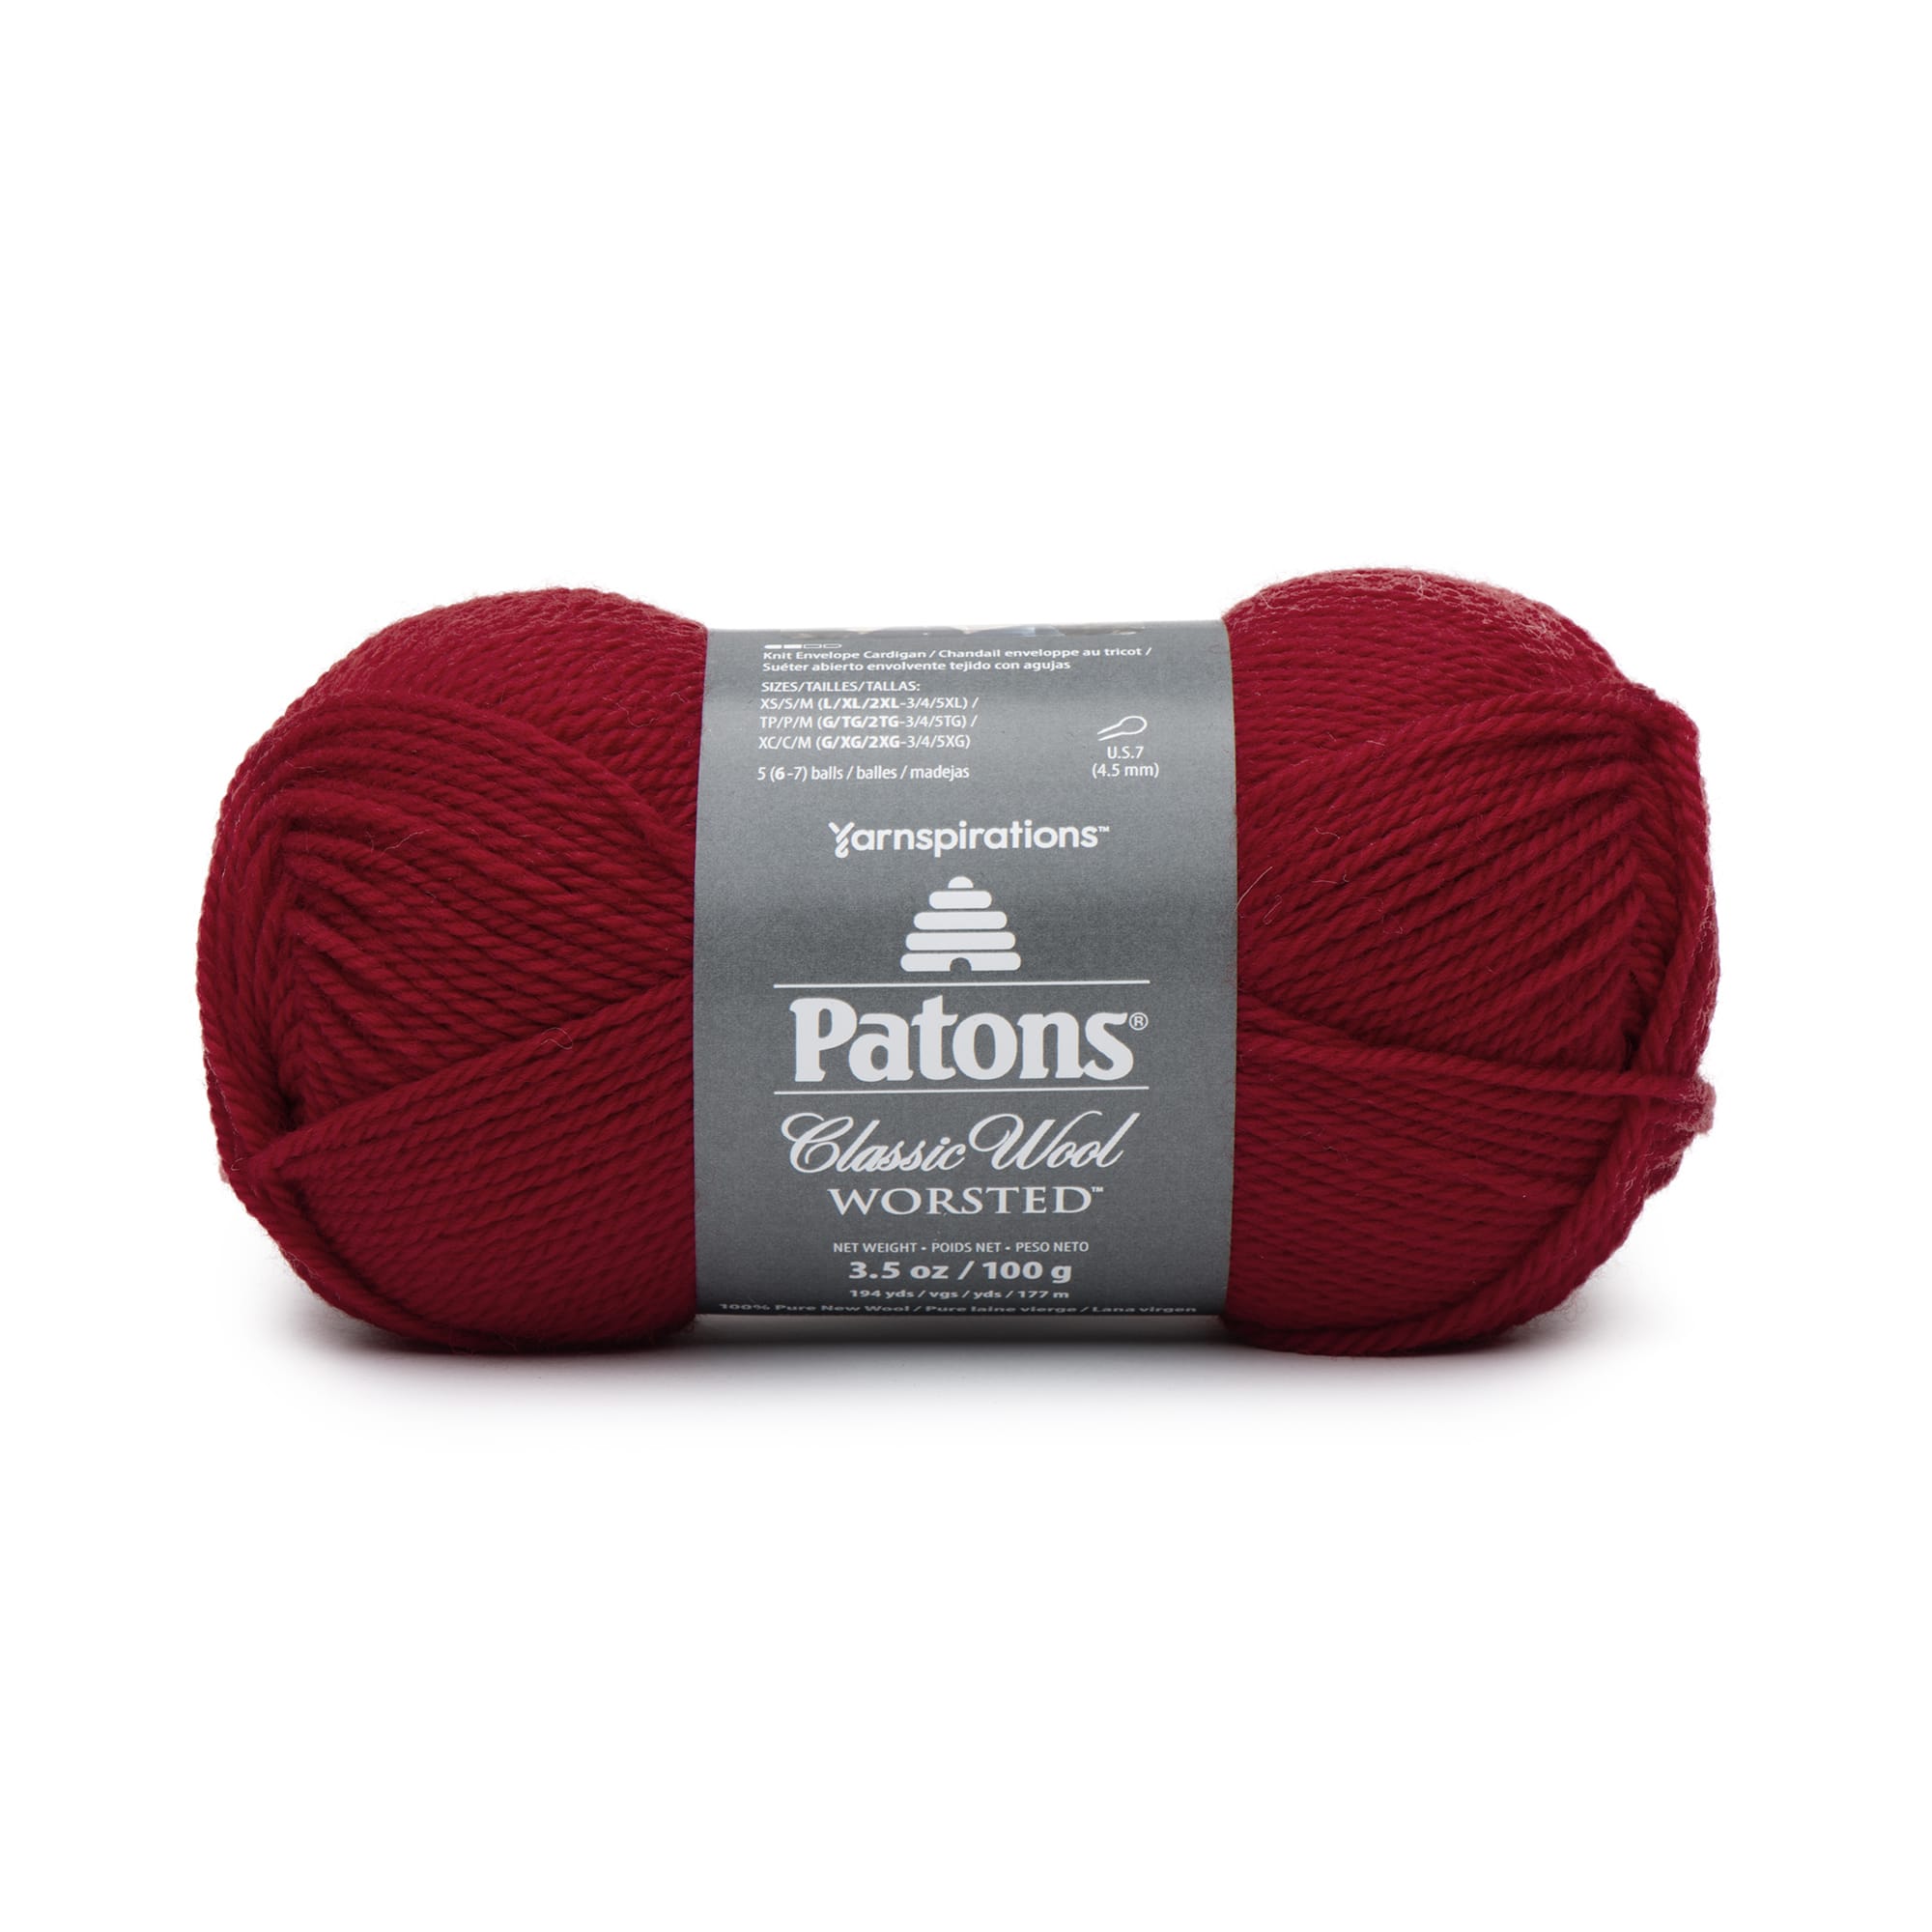 A wide variety of yarns for sale at Michaels, an arts & crafts